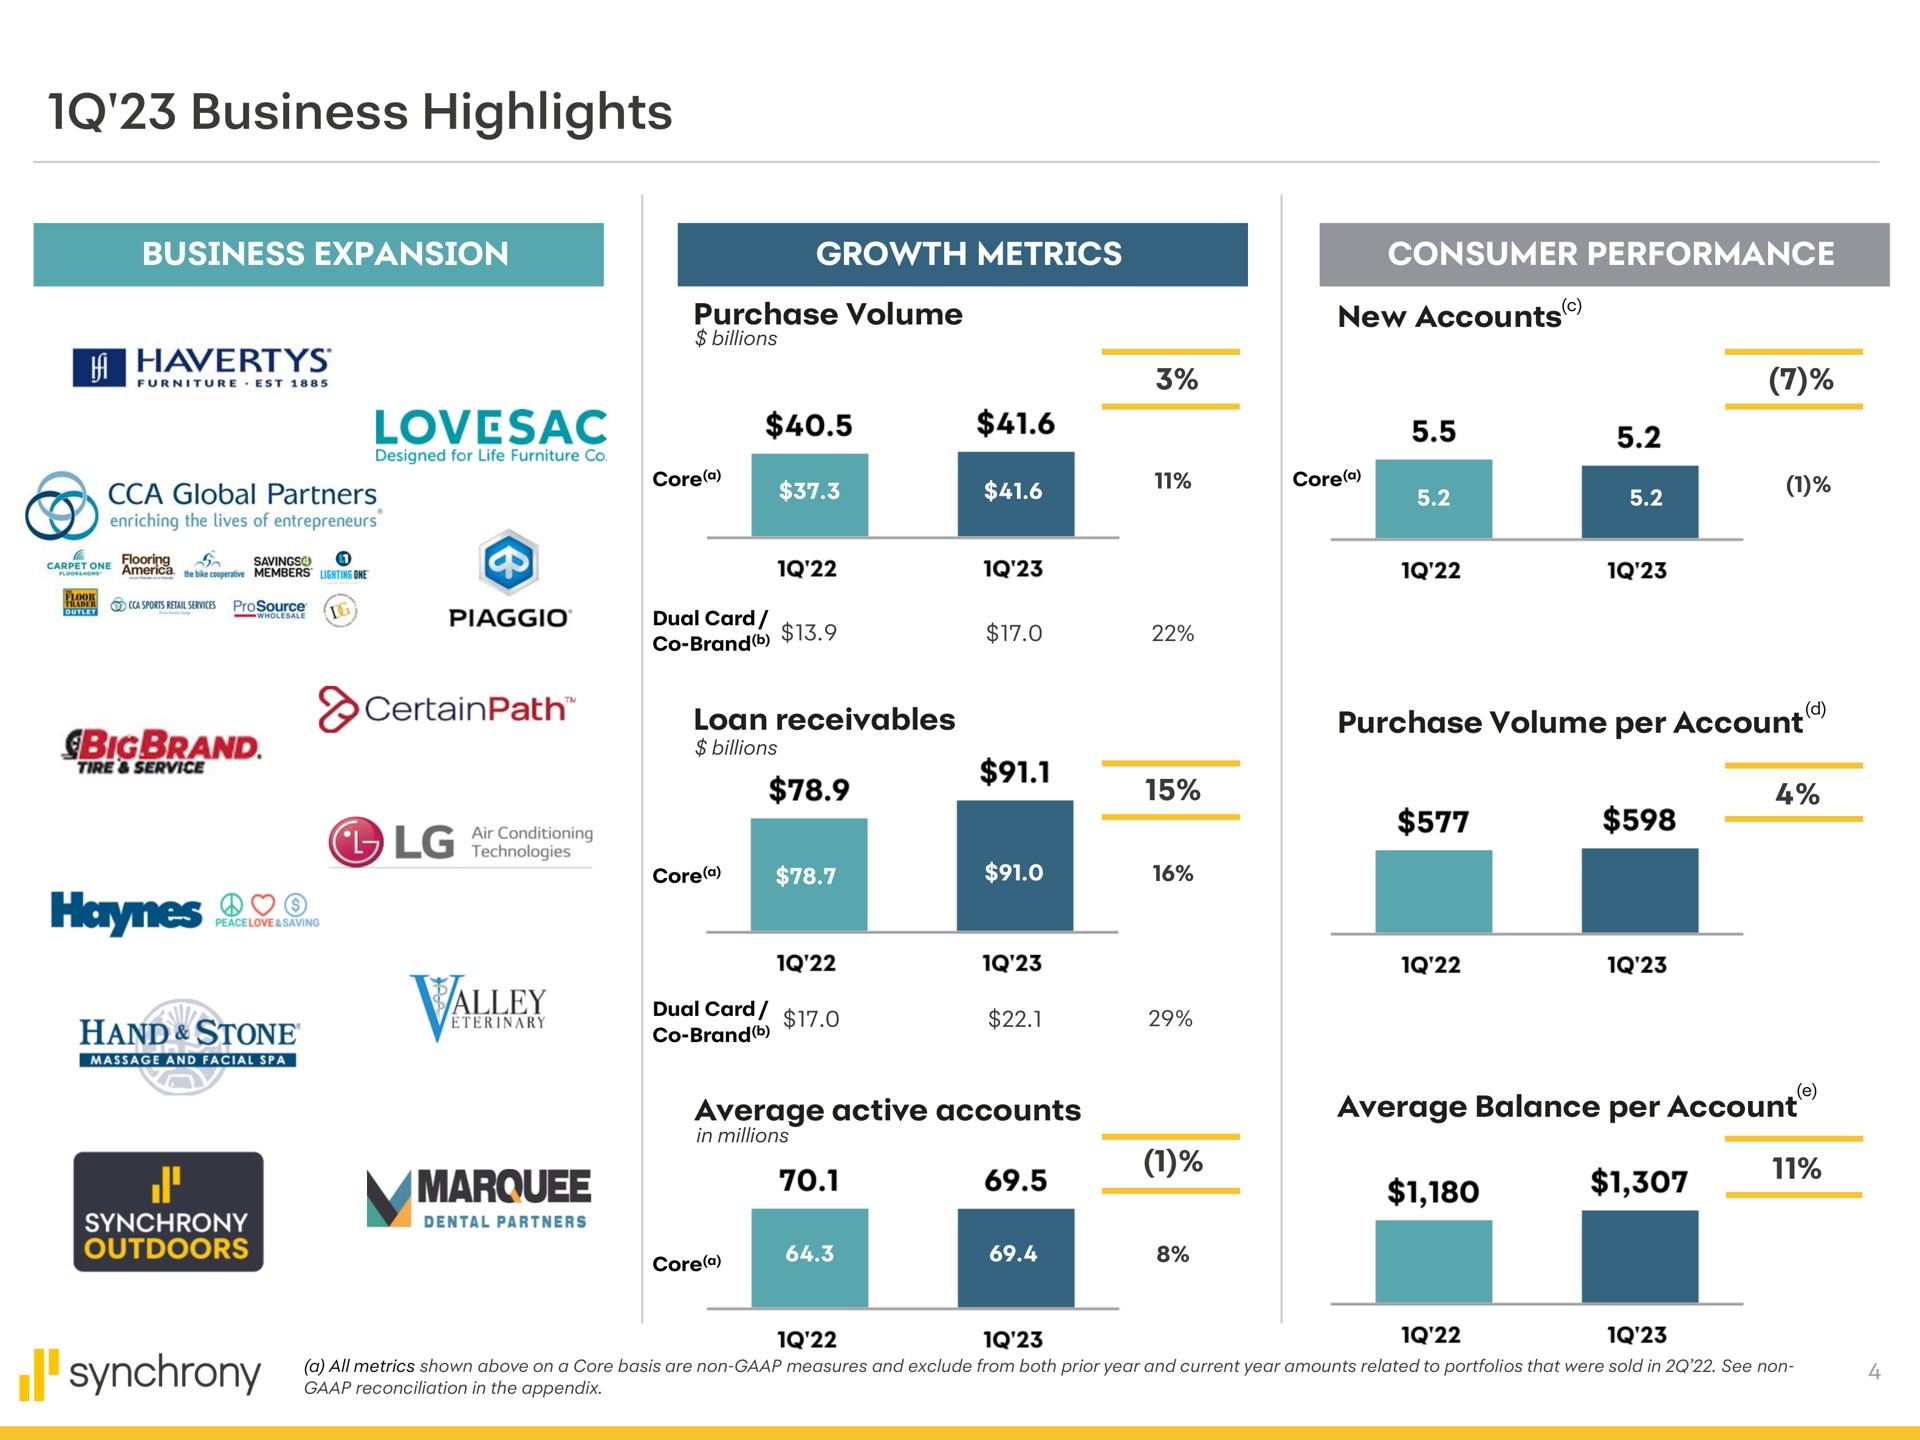 business highlights business expansion growth metrics consumer performance purchase volume new accounts global partners loan receivables hand stone piers brand i outdoors marquee purchase volume per account | Synchrony Financial